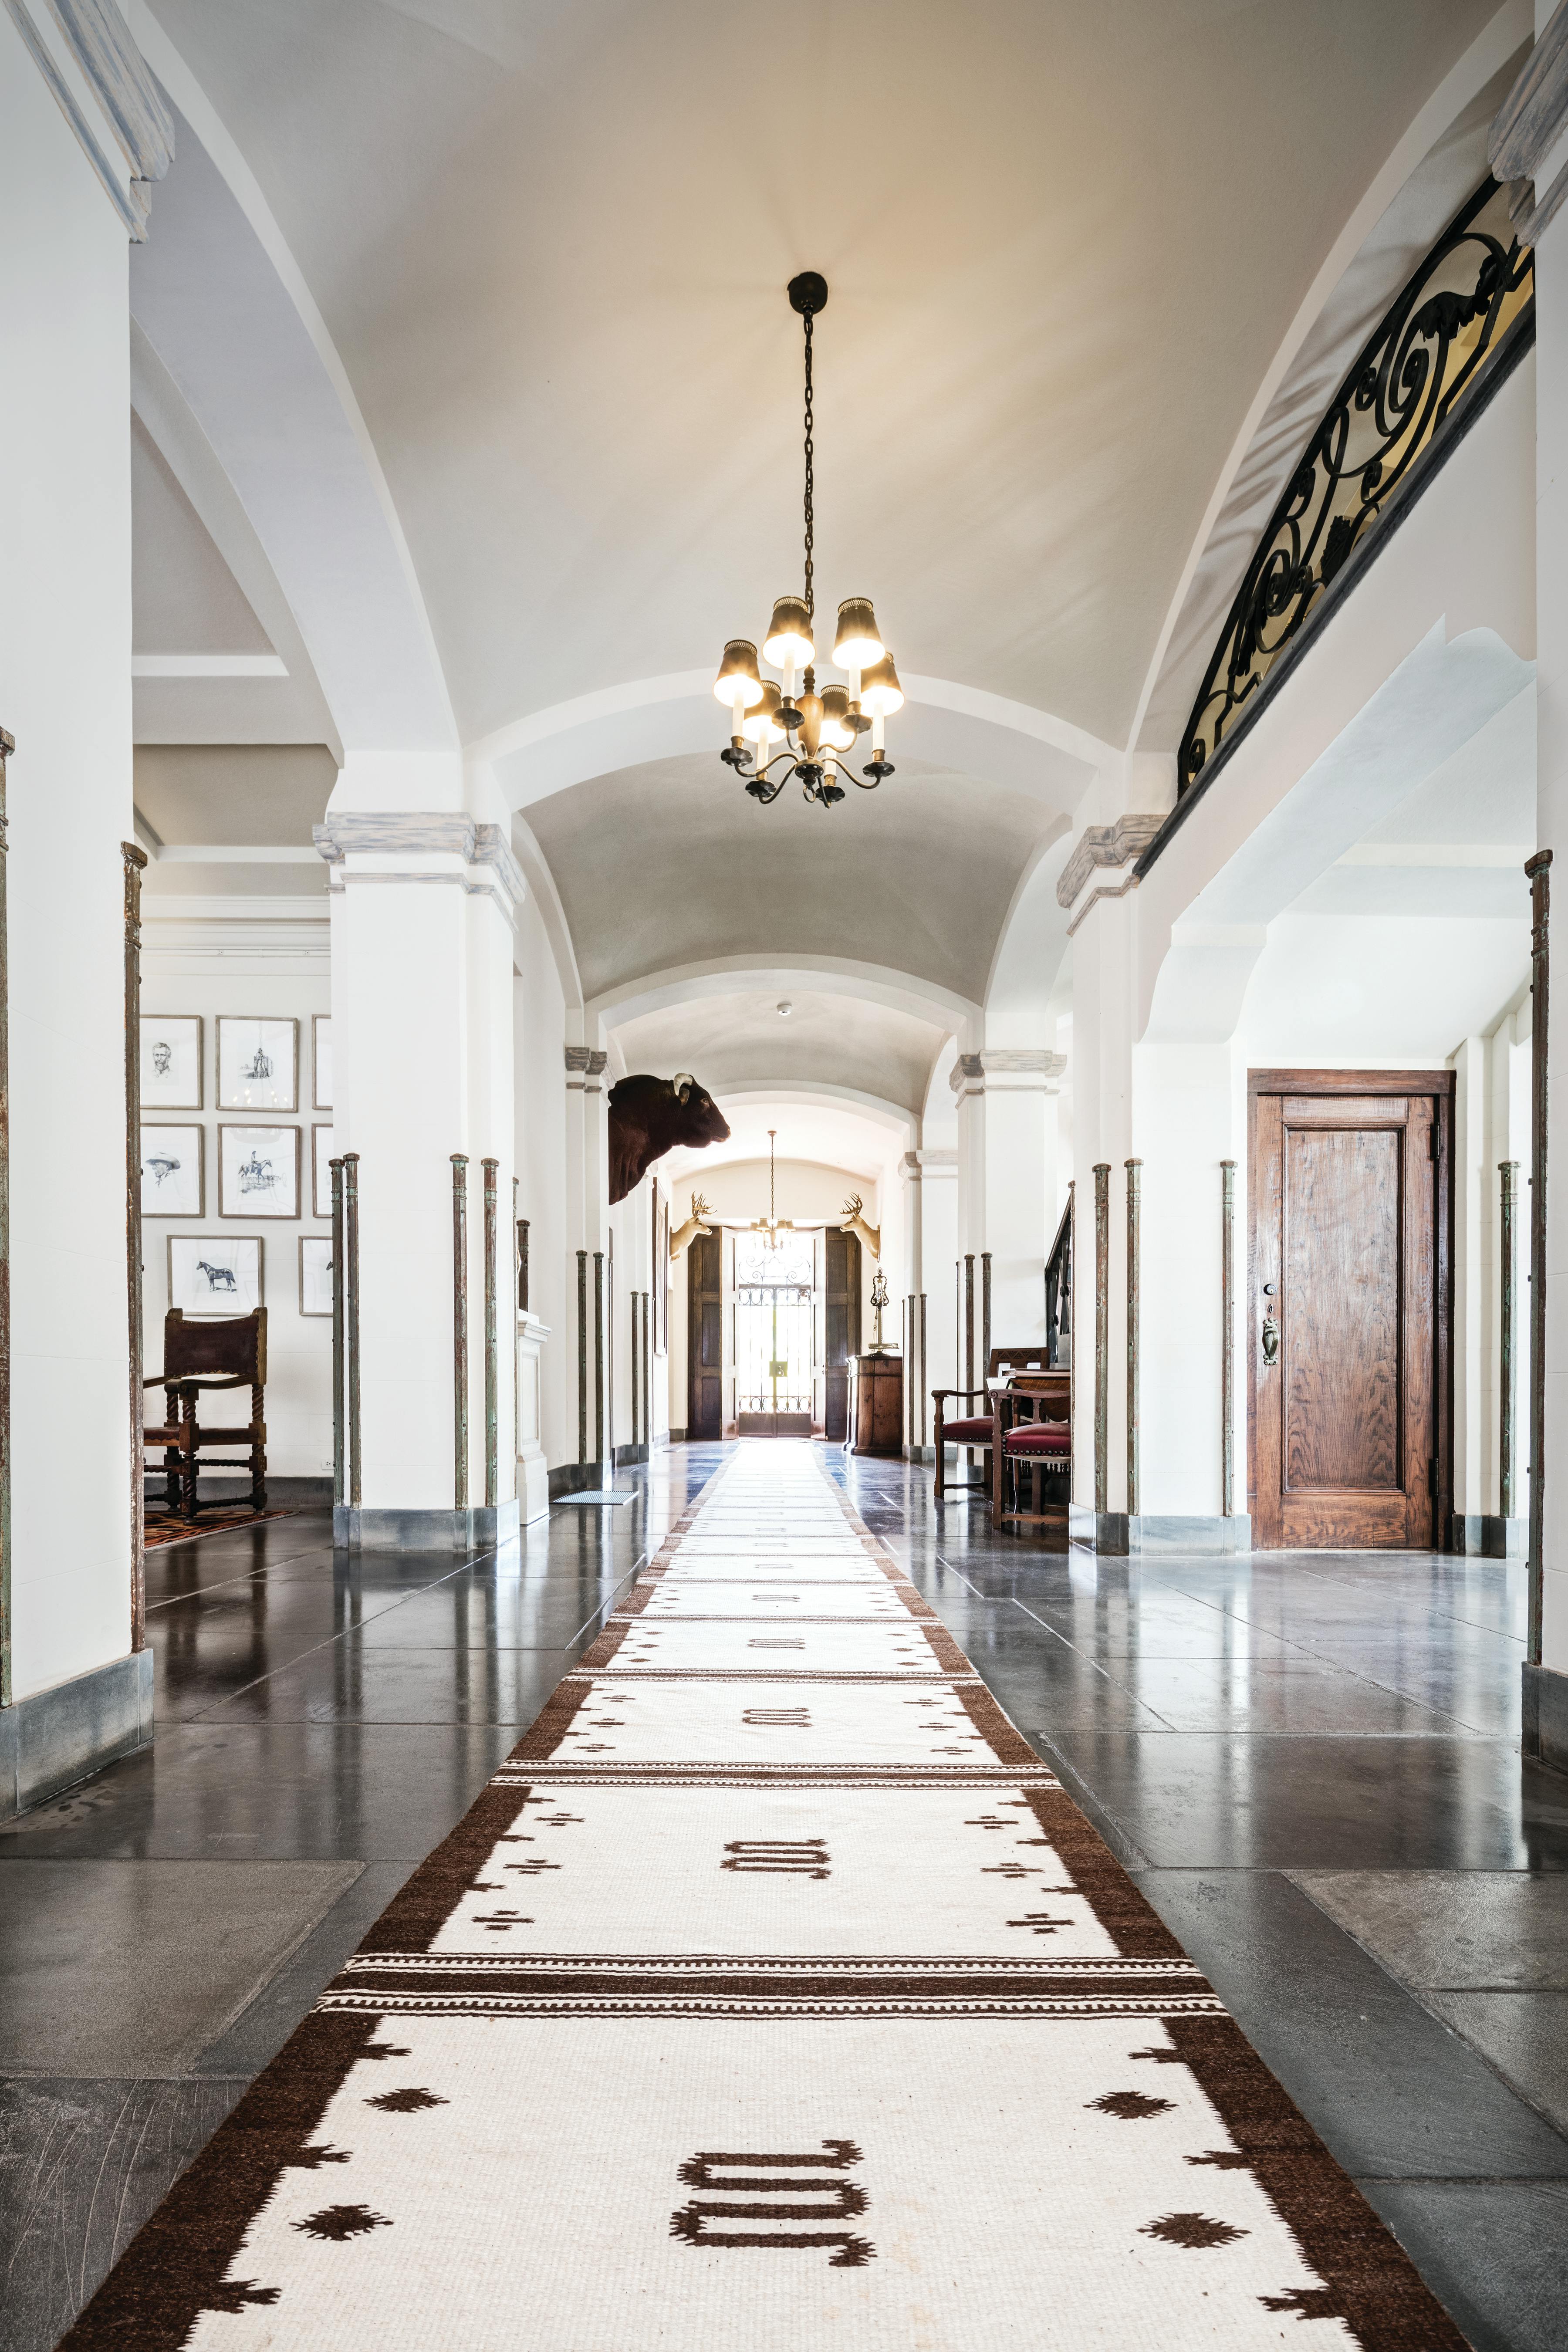 The front hall on the first floor features archways, columns, marble floors, and Tiffany-designed chandeliers. The sixty-foot runner on the floor was made in a saddle blanket design by King Ranch master weaver Emiliano Garcia.